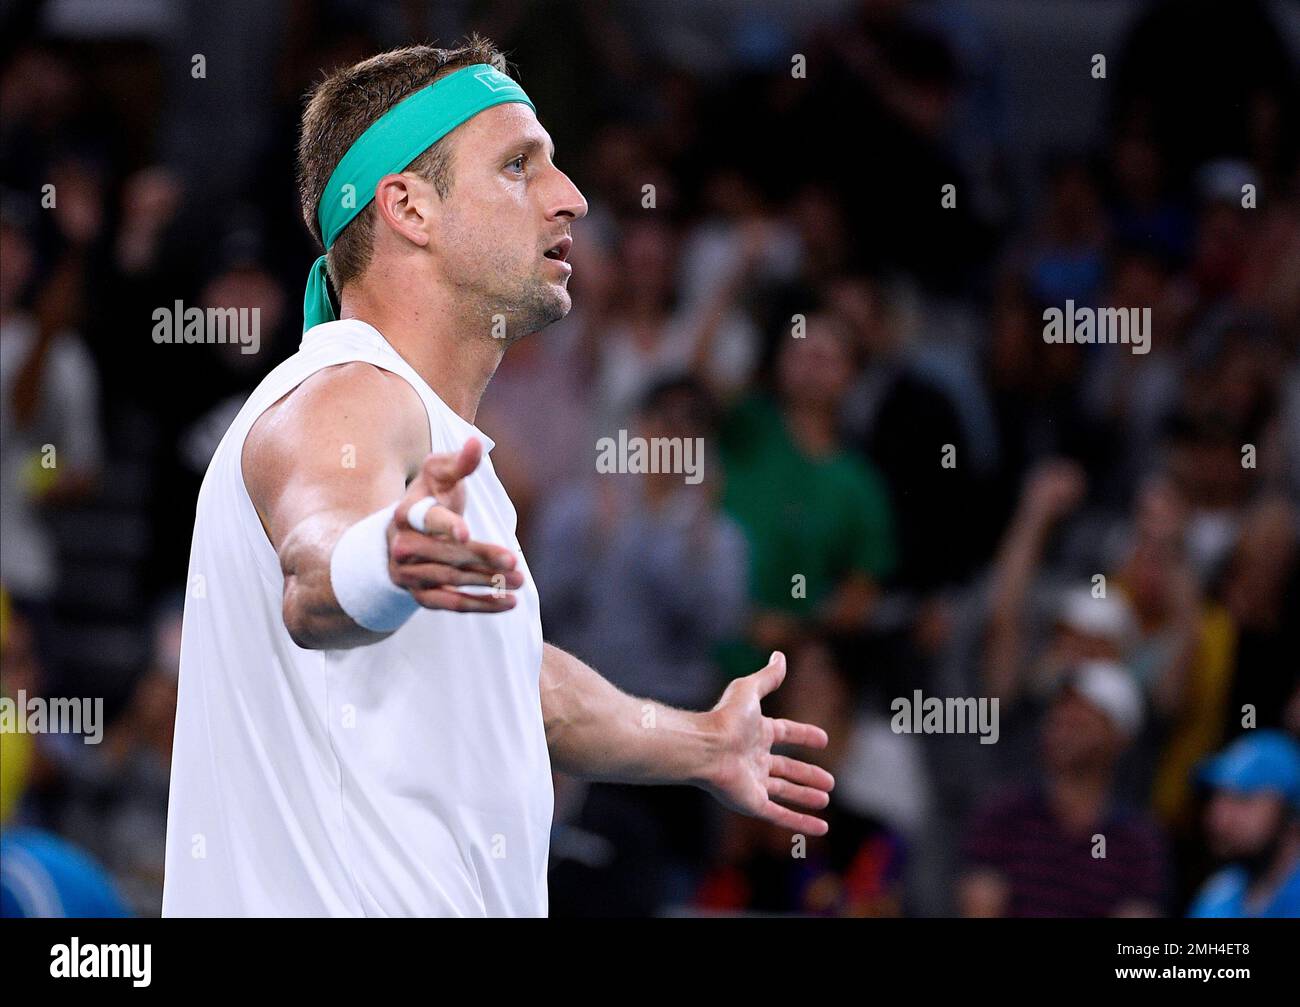 Tennys Sandgren of the U.S. reacts after defeating Italy's Fabio Fognini  during their fourth round singles match at the Australian Open tennis  championship in Melbourne, Australia, Sunday, Jan. 26, 2020. (AP Photo/Andy